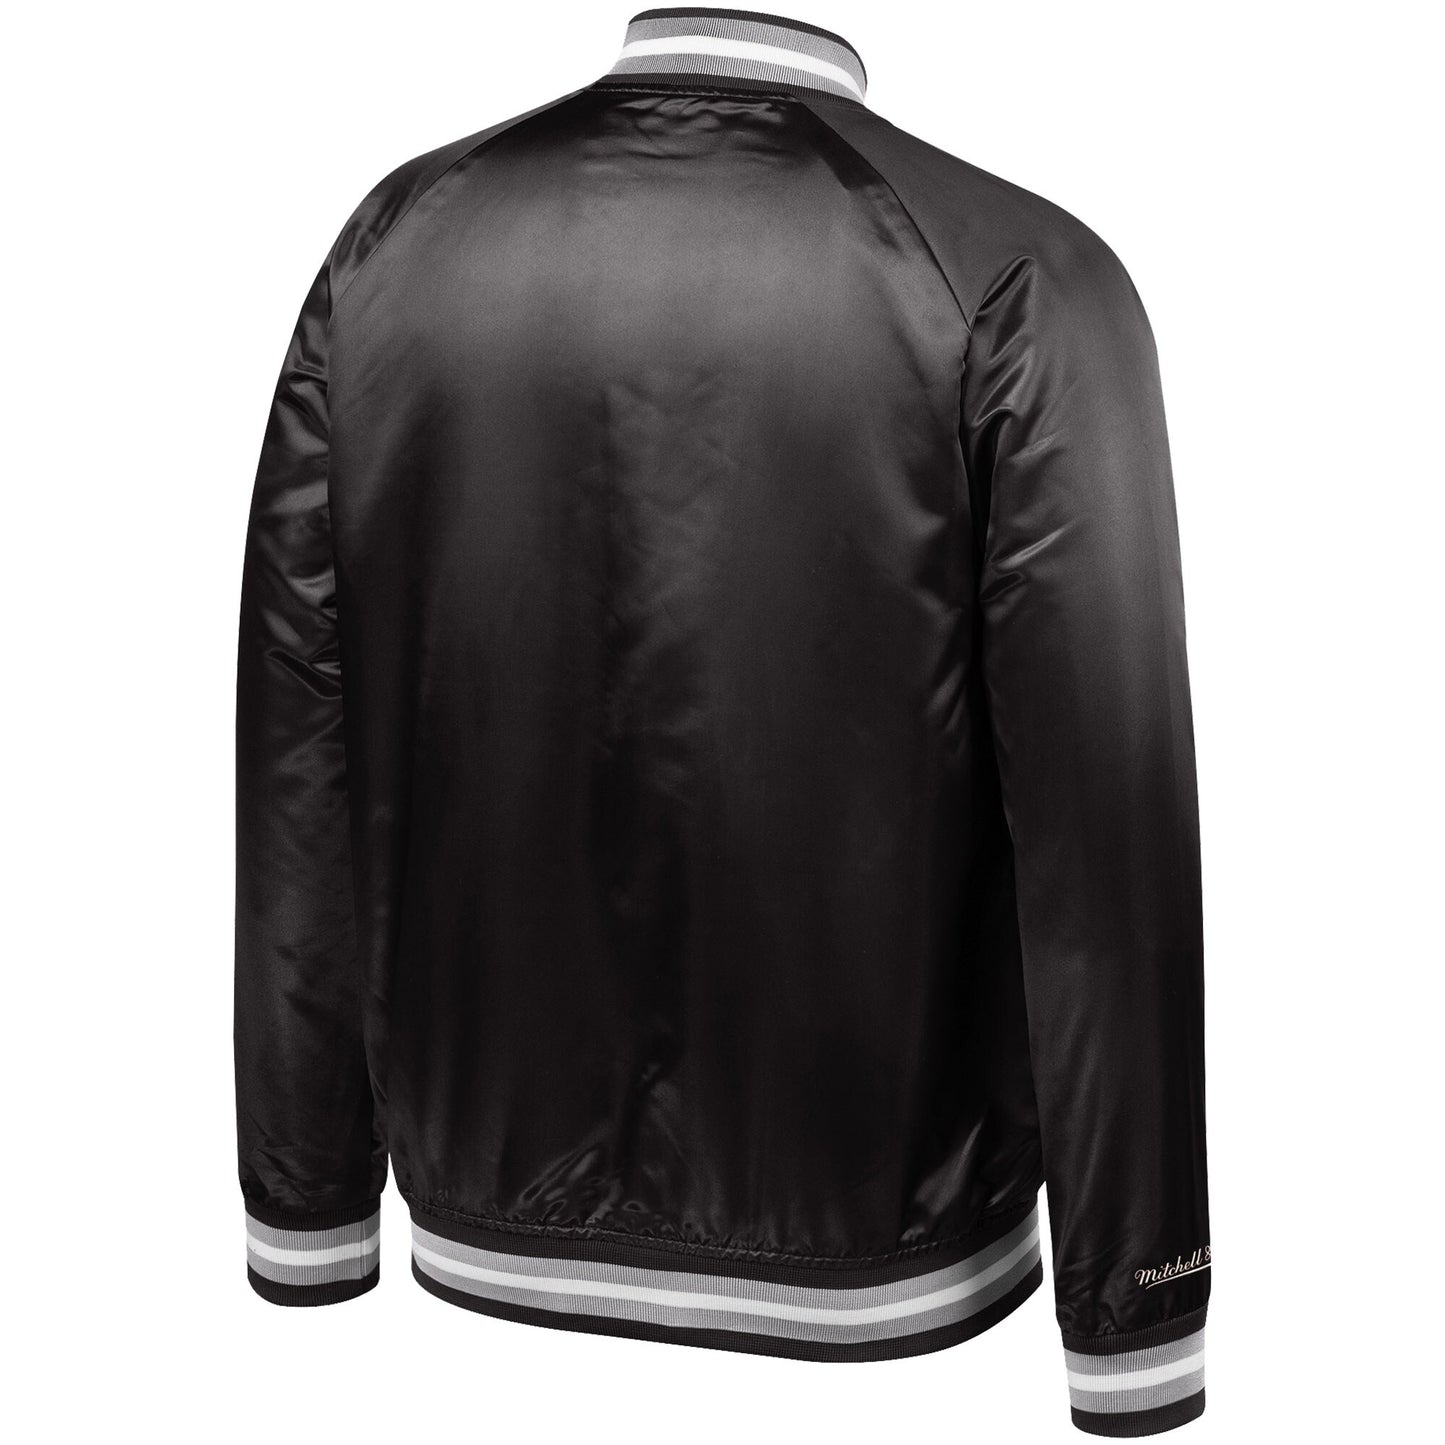 Men's Chicago White Sox Mitchell & Ness Cooperstown Collection Black Satin Full-Snap Jacket